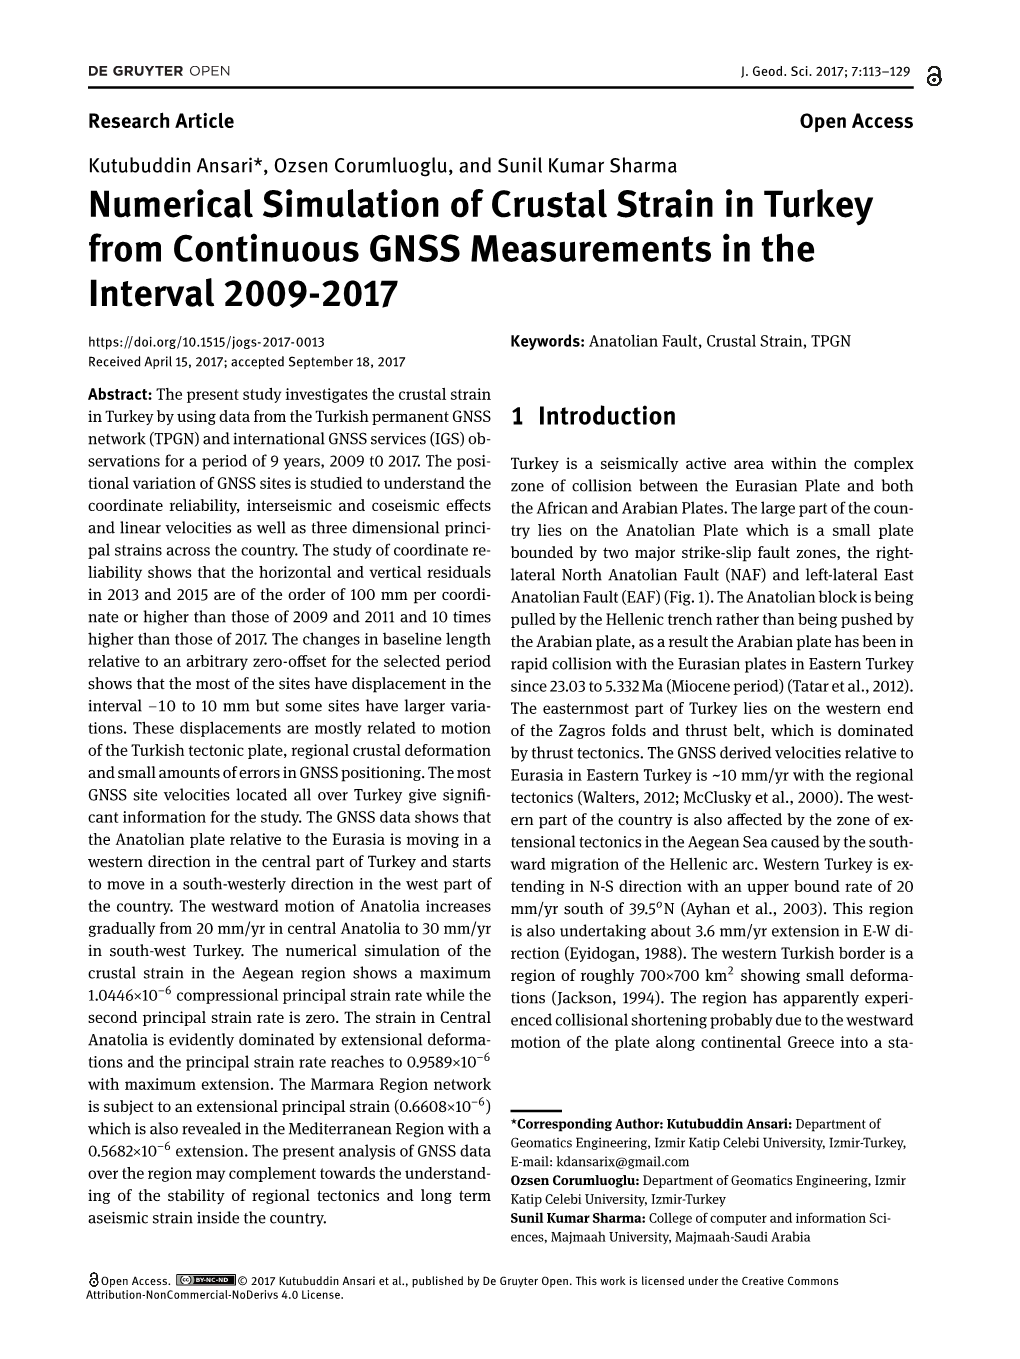 Numerical Simulation of Crustal Strain in Turkey from Continuous GNSS